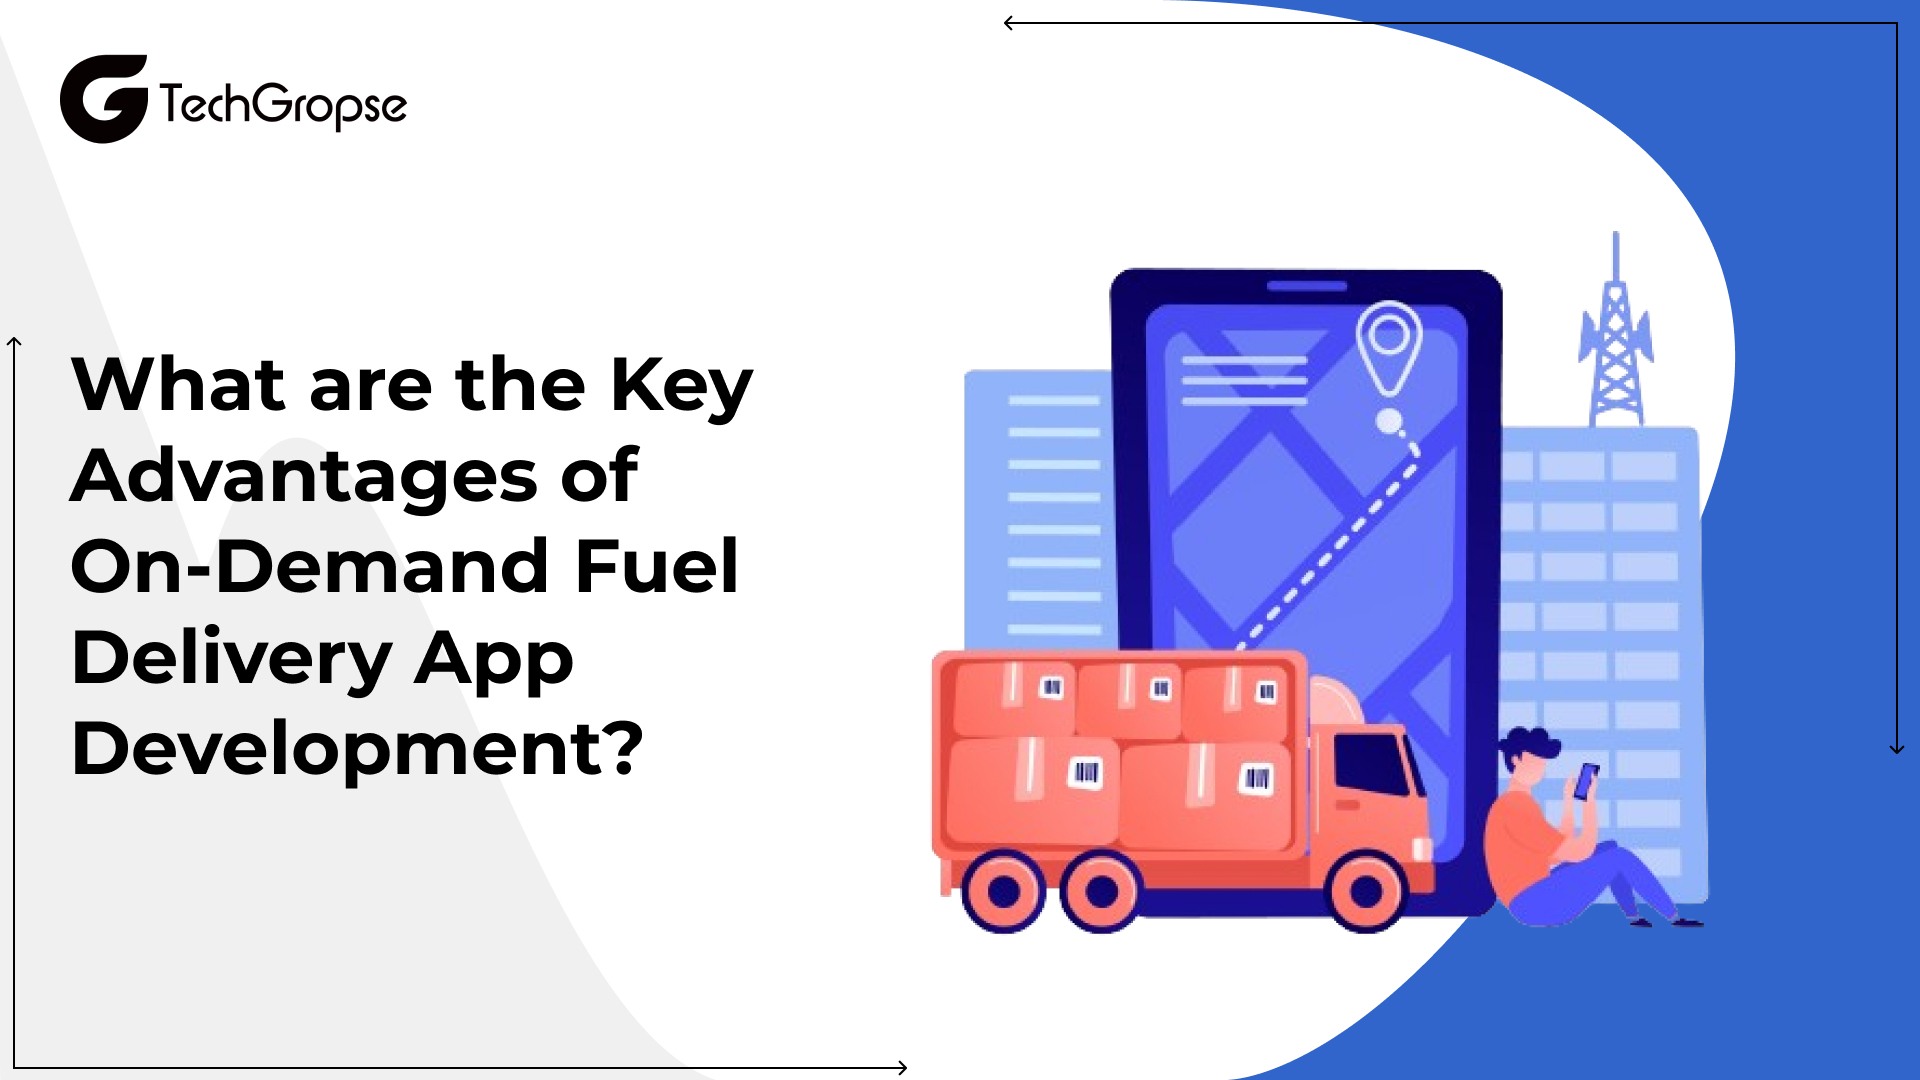 What are the Key Advantages of On-Demand Fuel Delivery App Development?